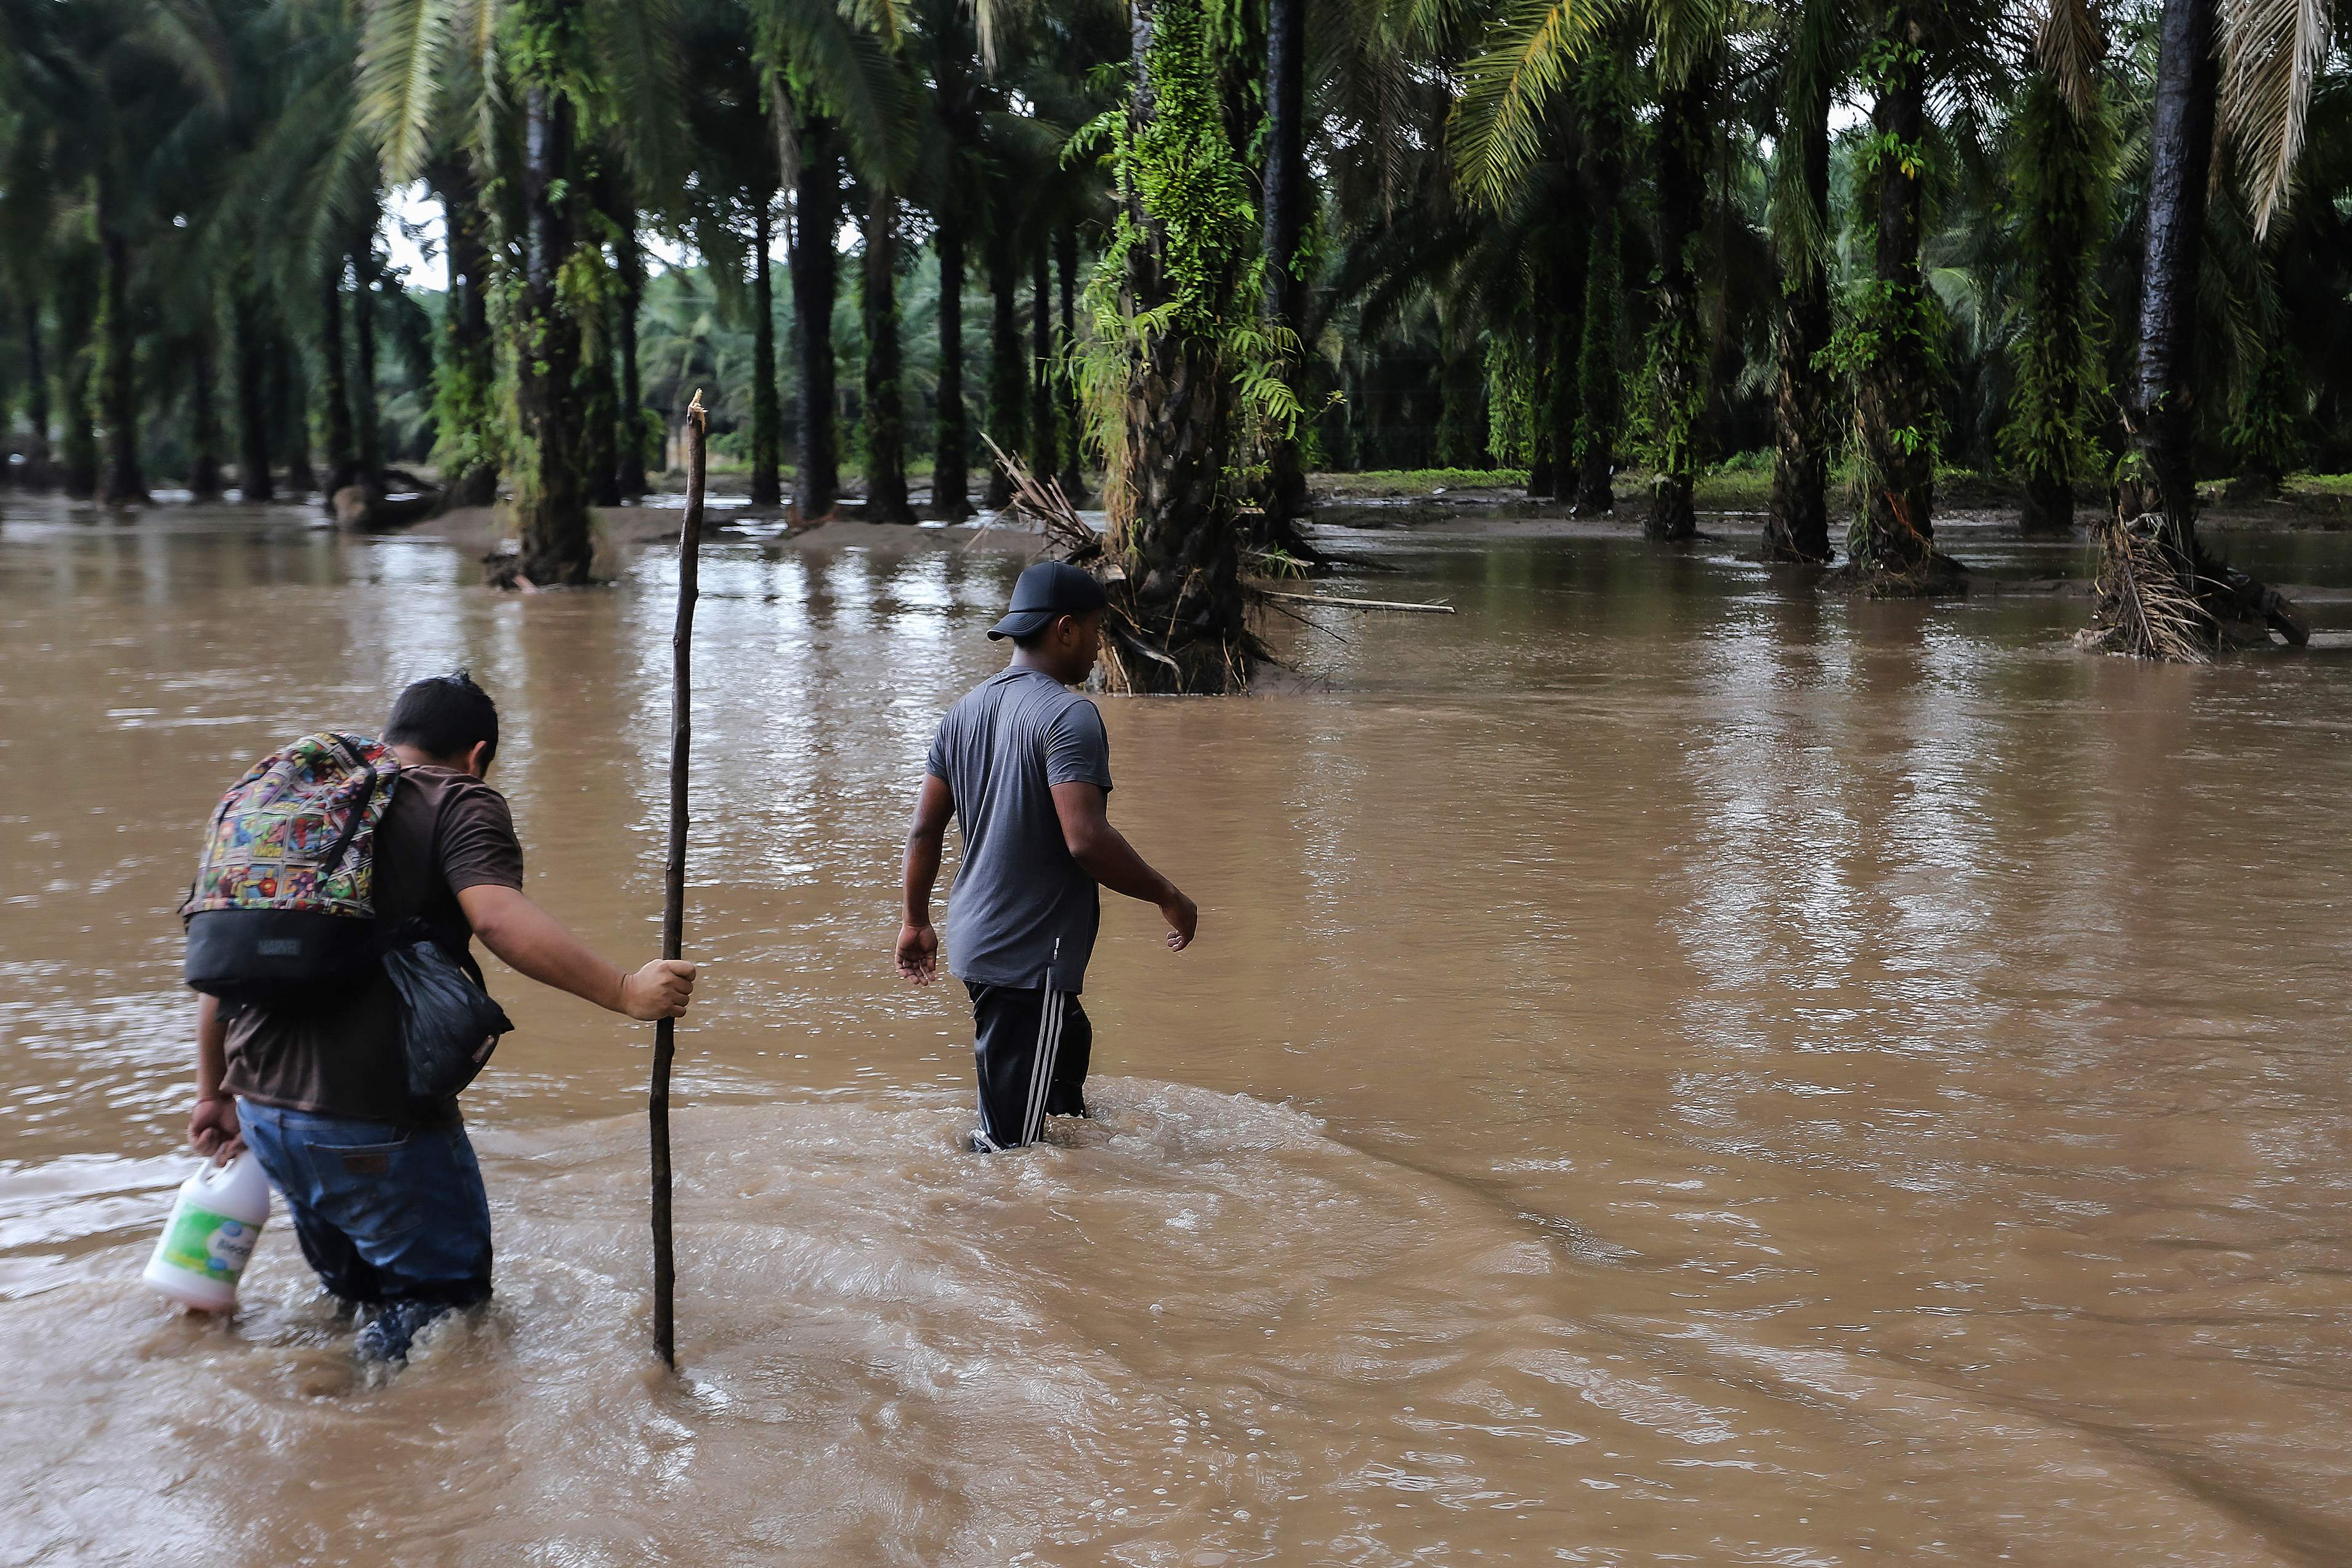 Two men walk though a flooded farm in Honduras after heavy rainfall from Hurricane Julia on Sunday